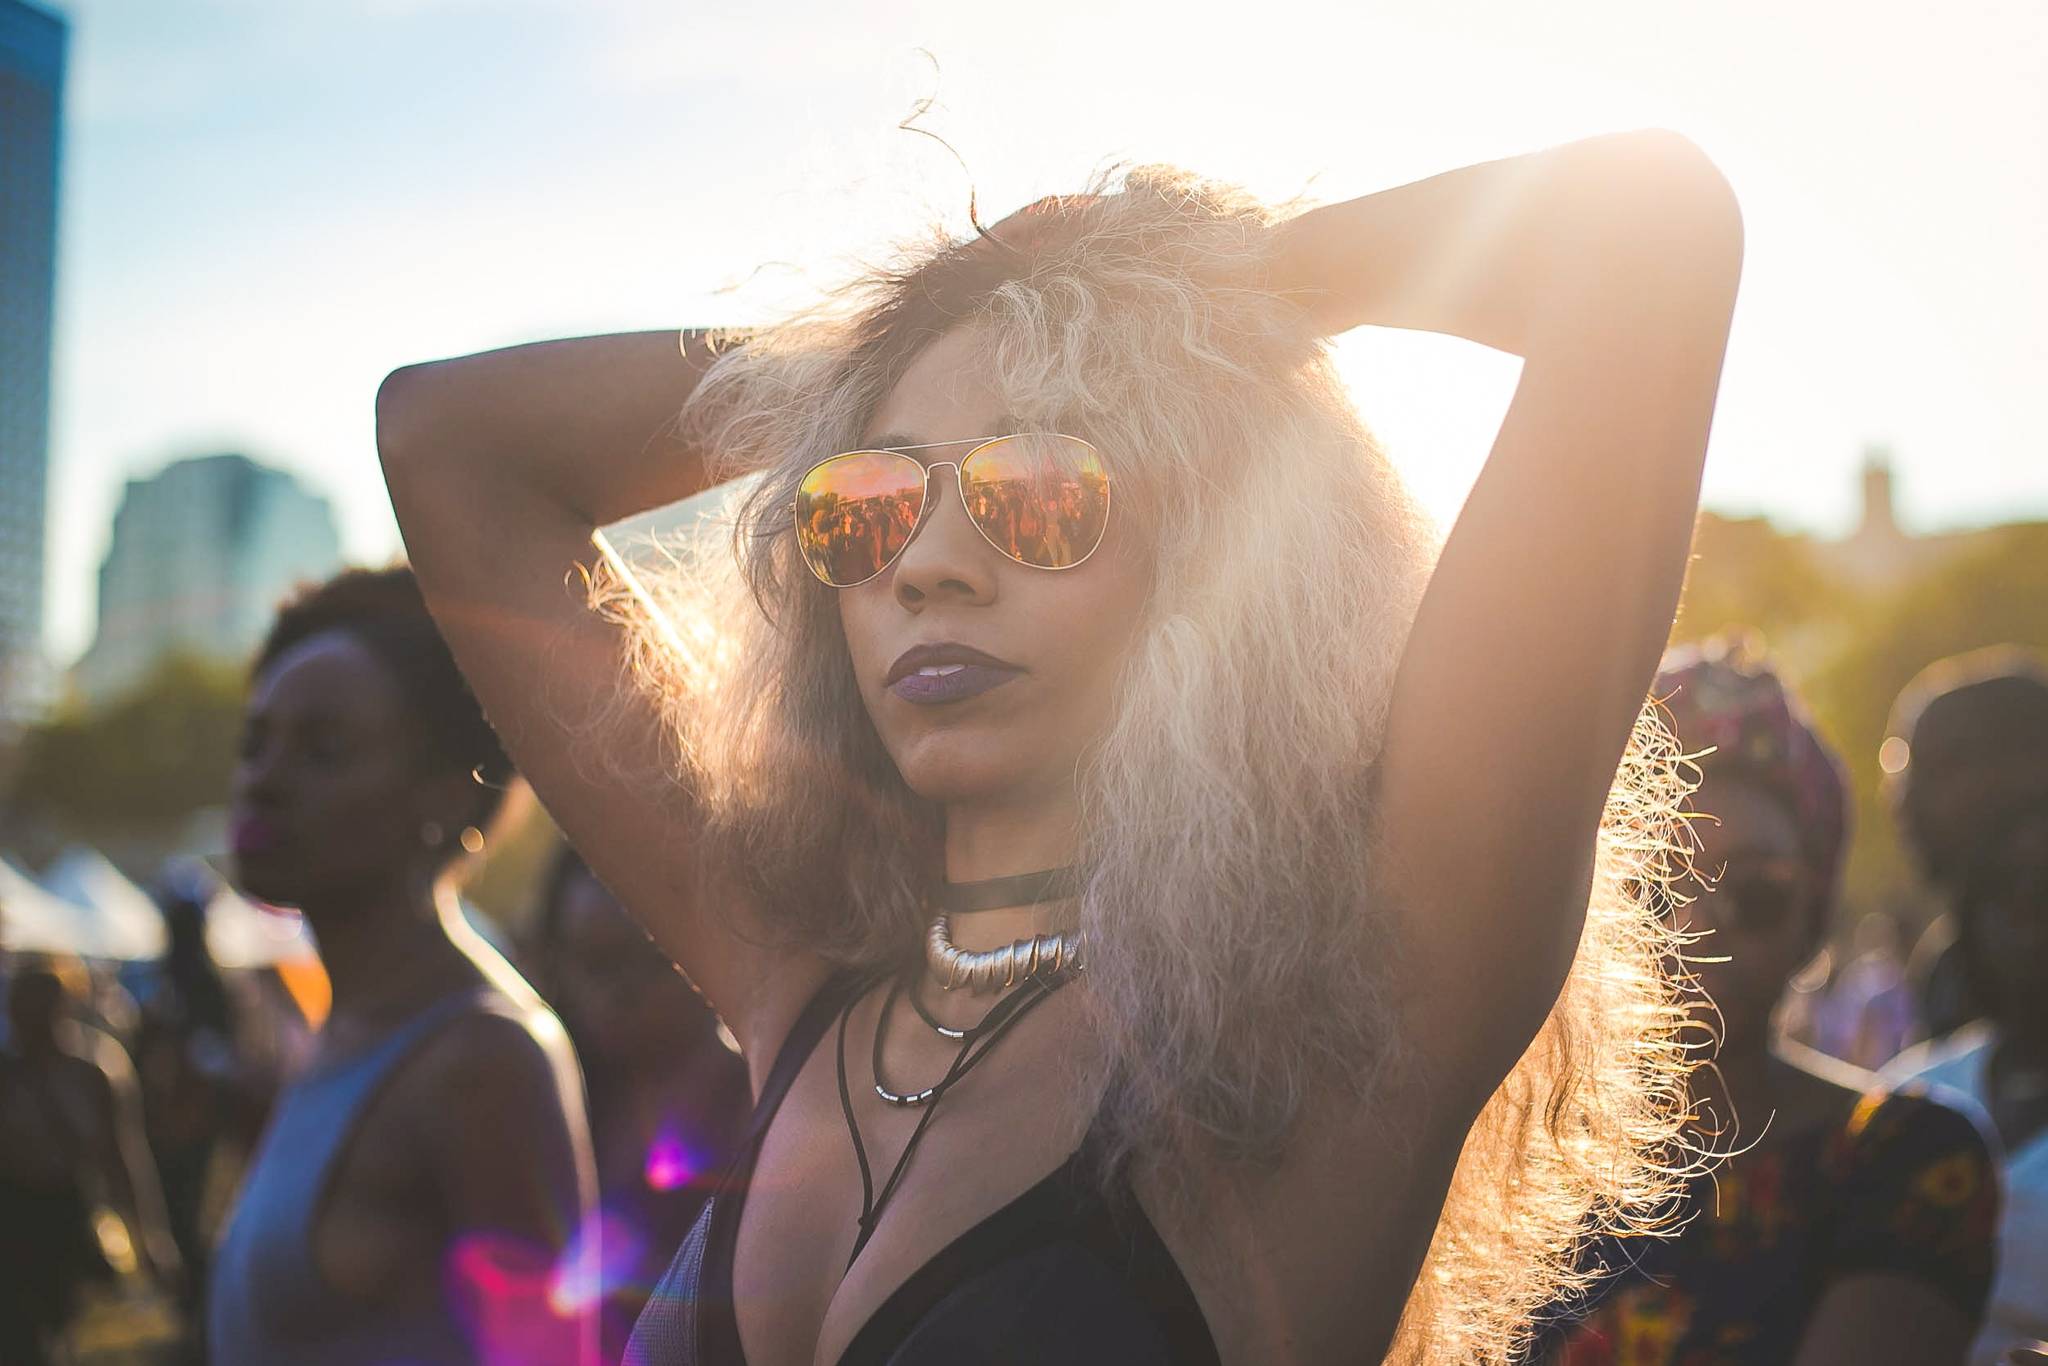 How can brands help festival-goers go green?